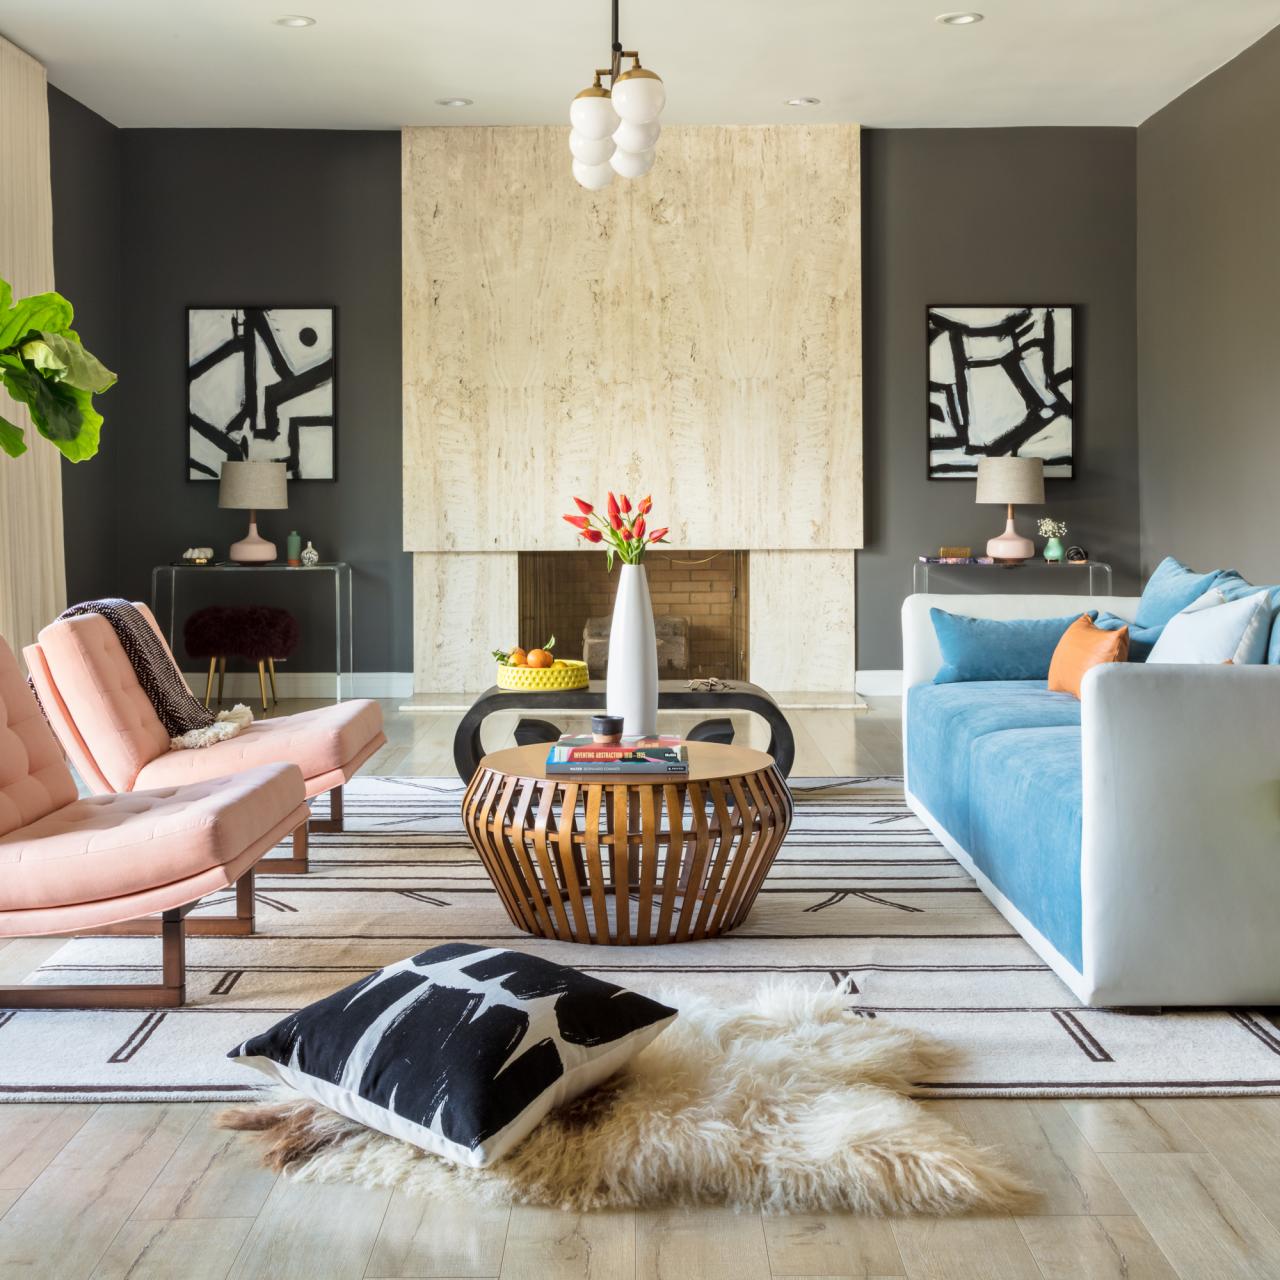 How To Create A Functional Smart Home With The Help Of An Interior Designer